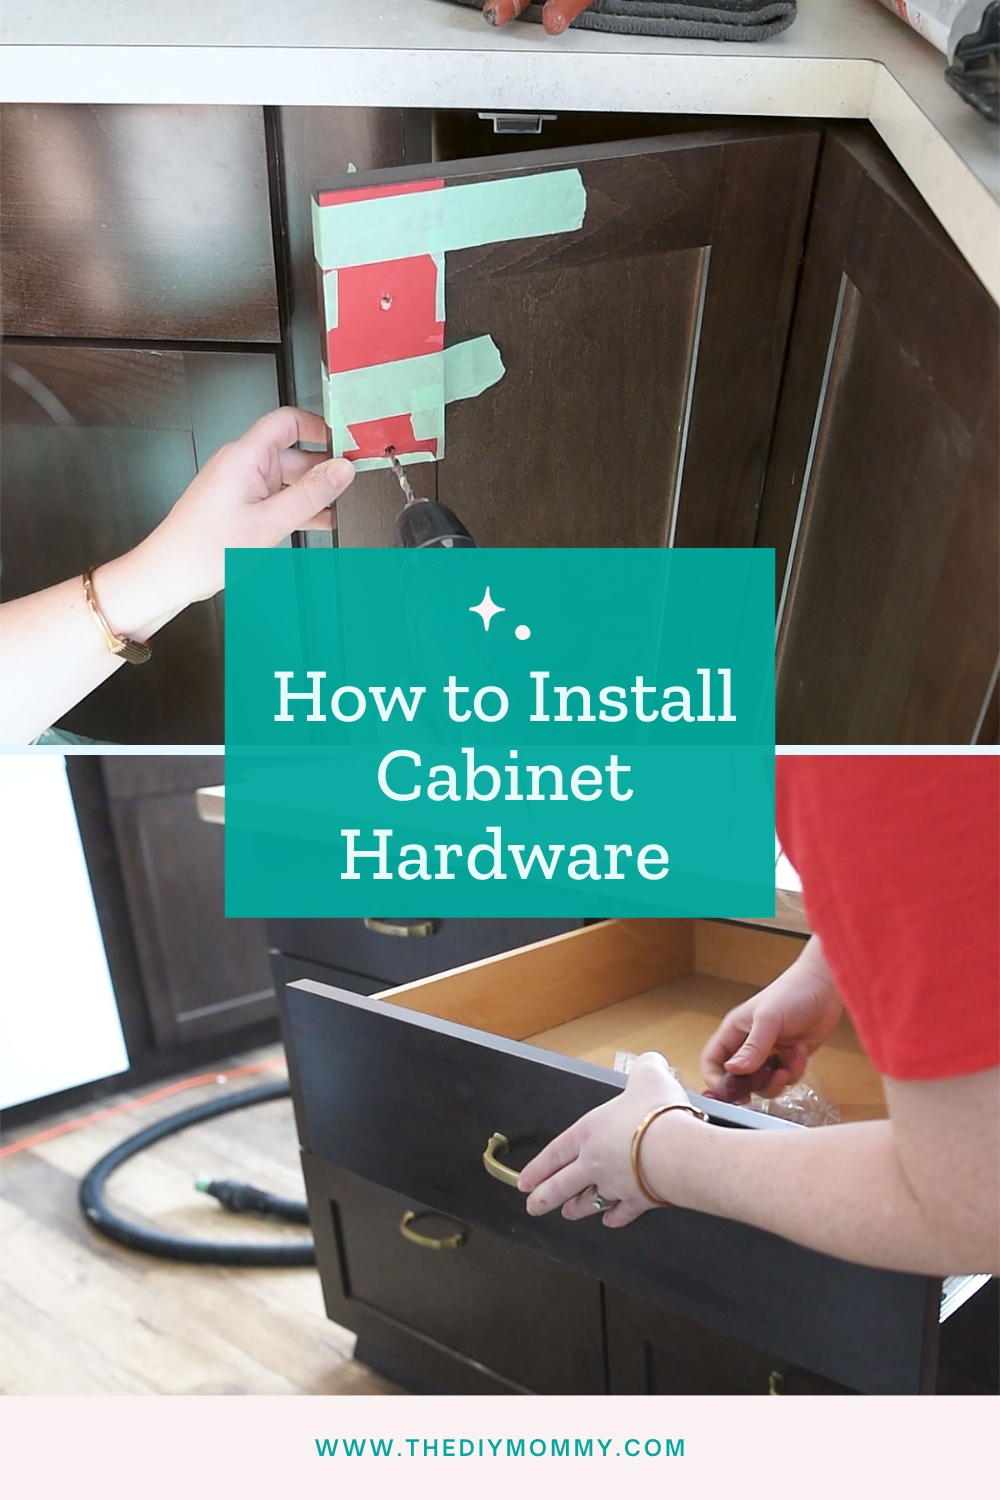 How to Add Handles to Kitchen Cabinets – An Easy Guide